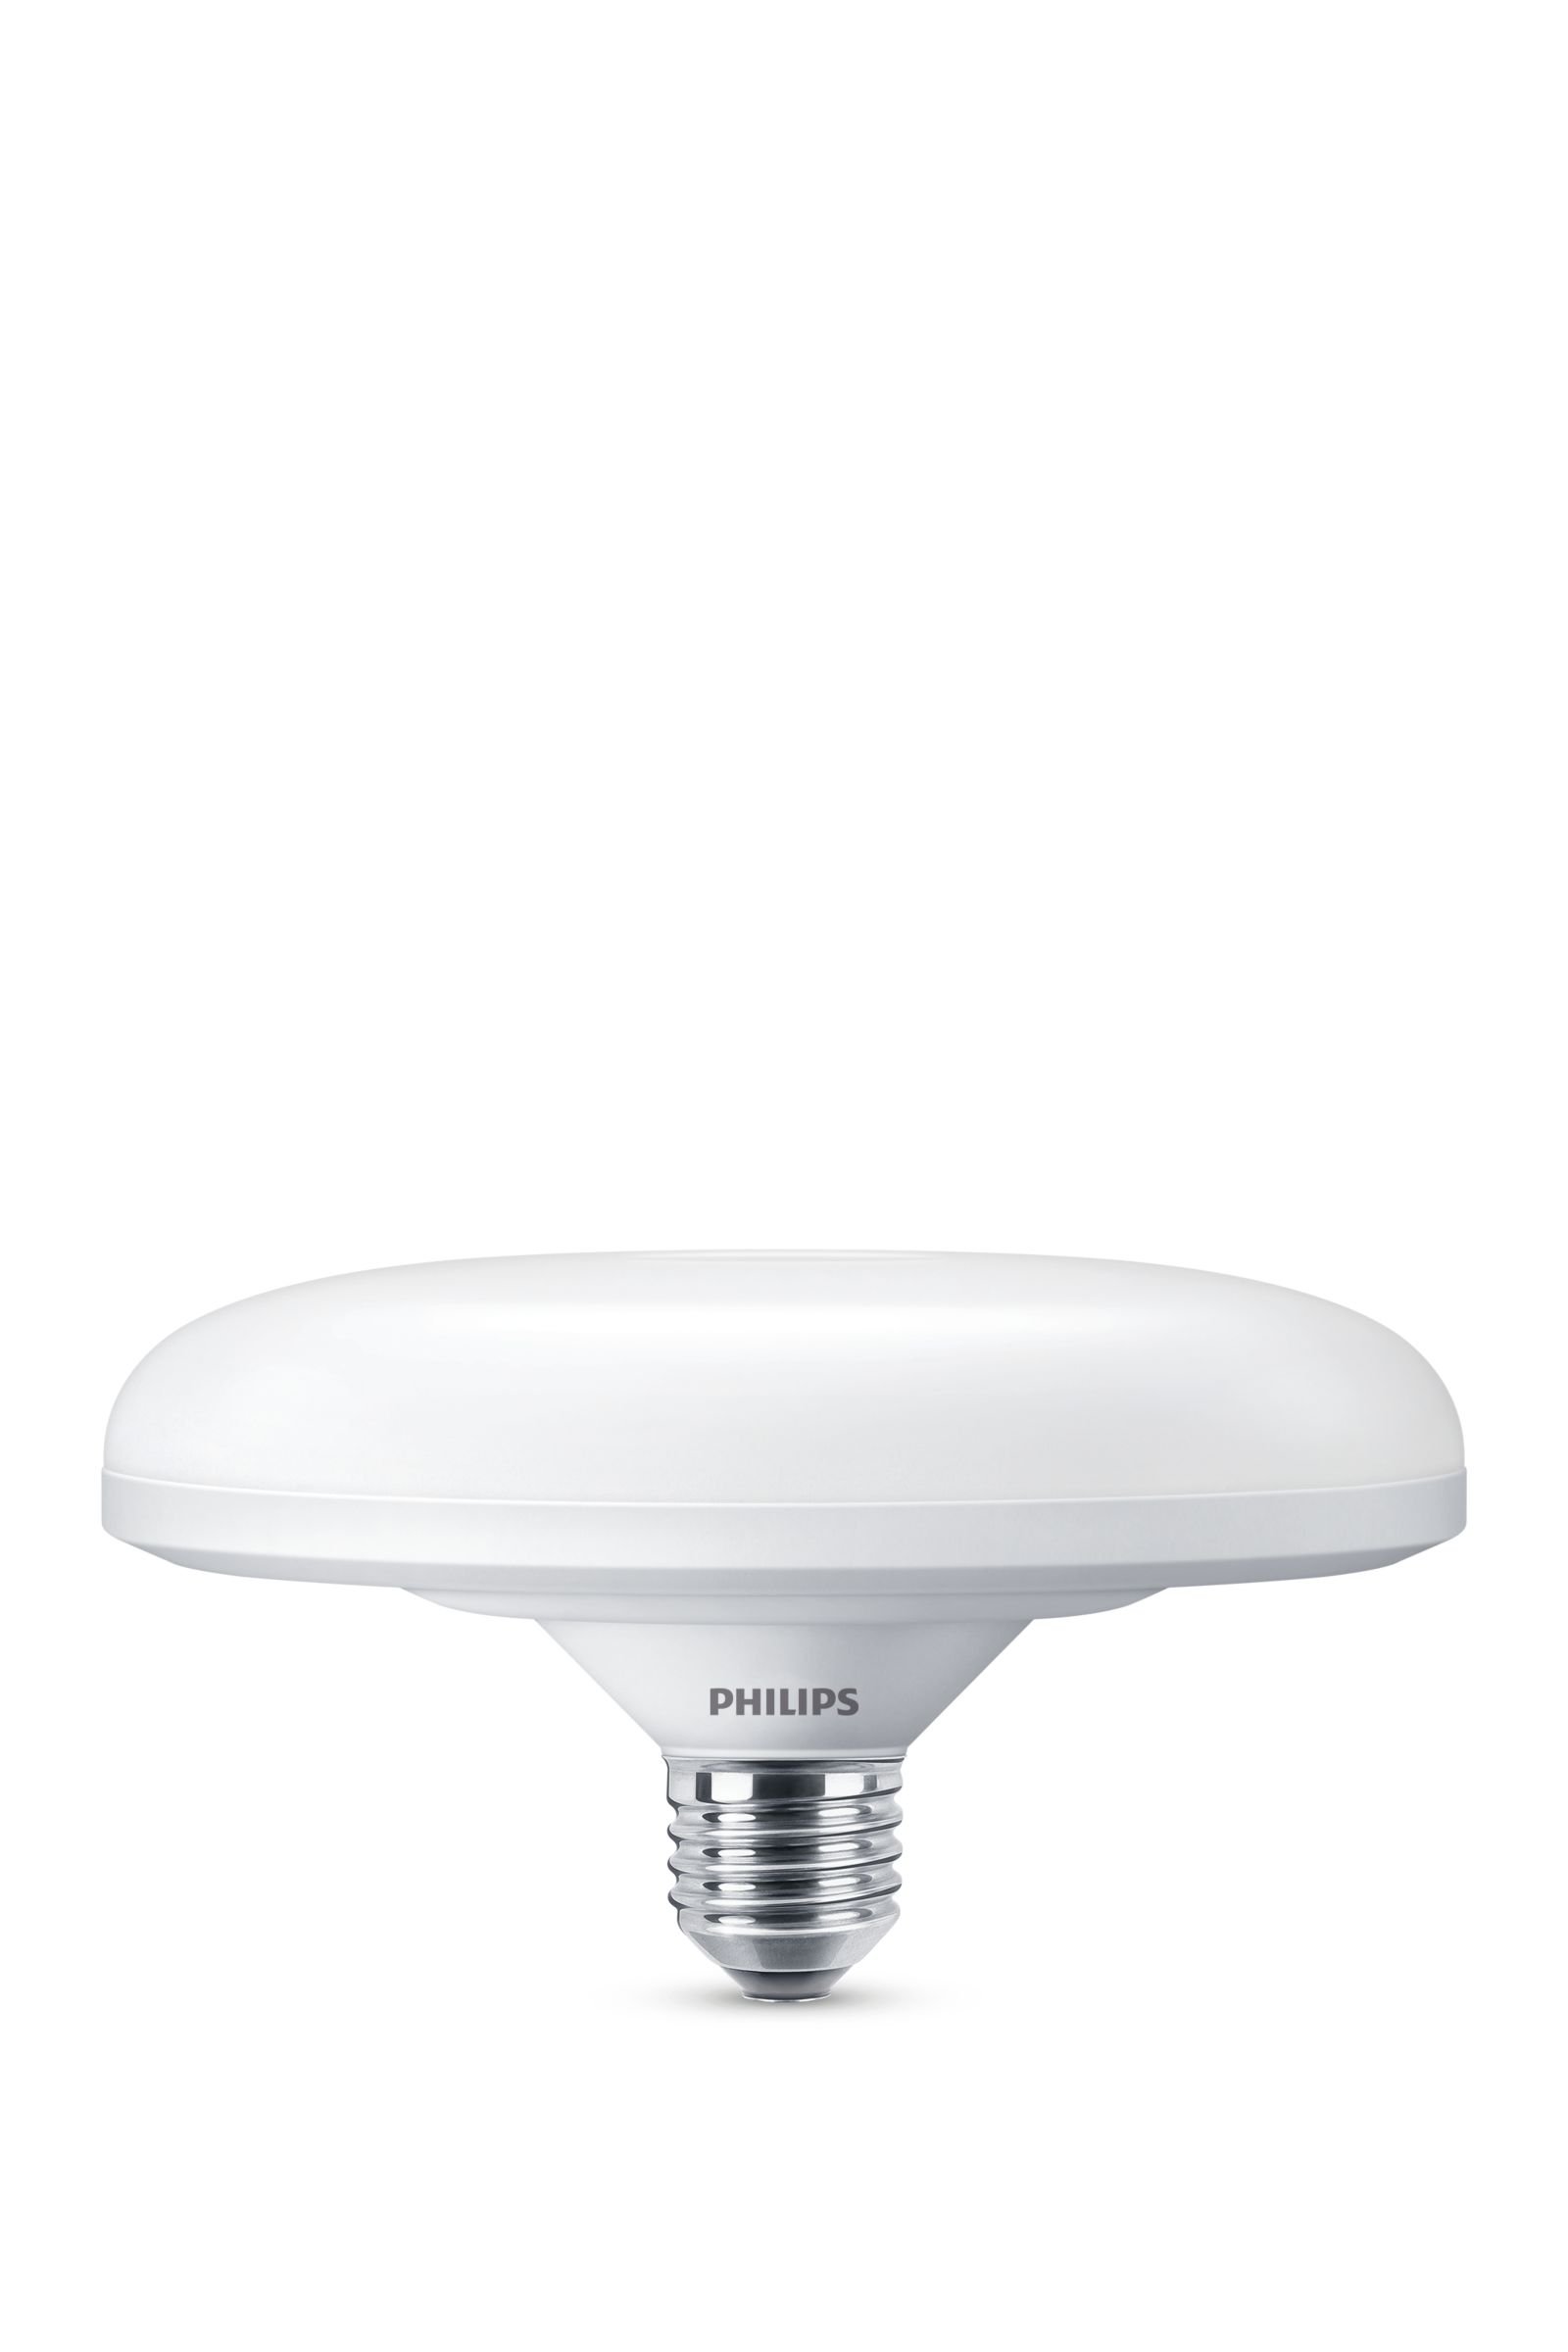 Specifications of the LED Bulb 8718699618988 | Philips